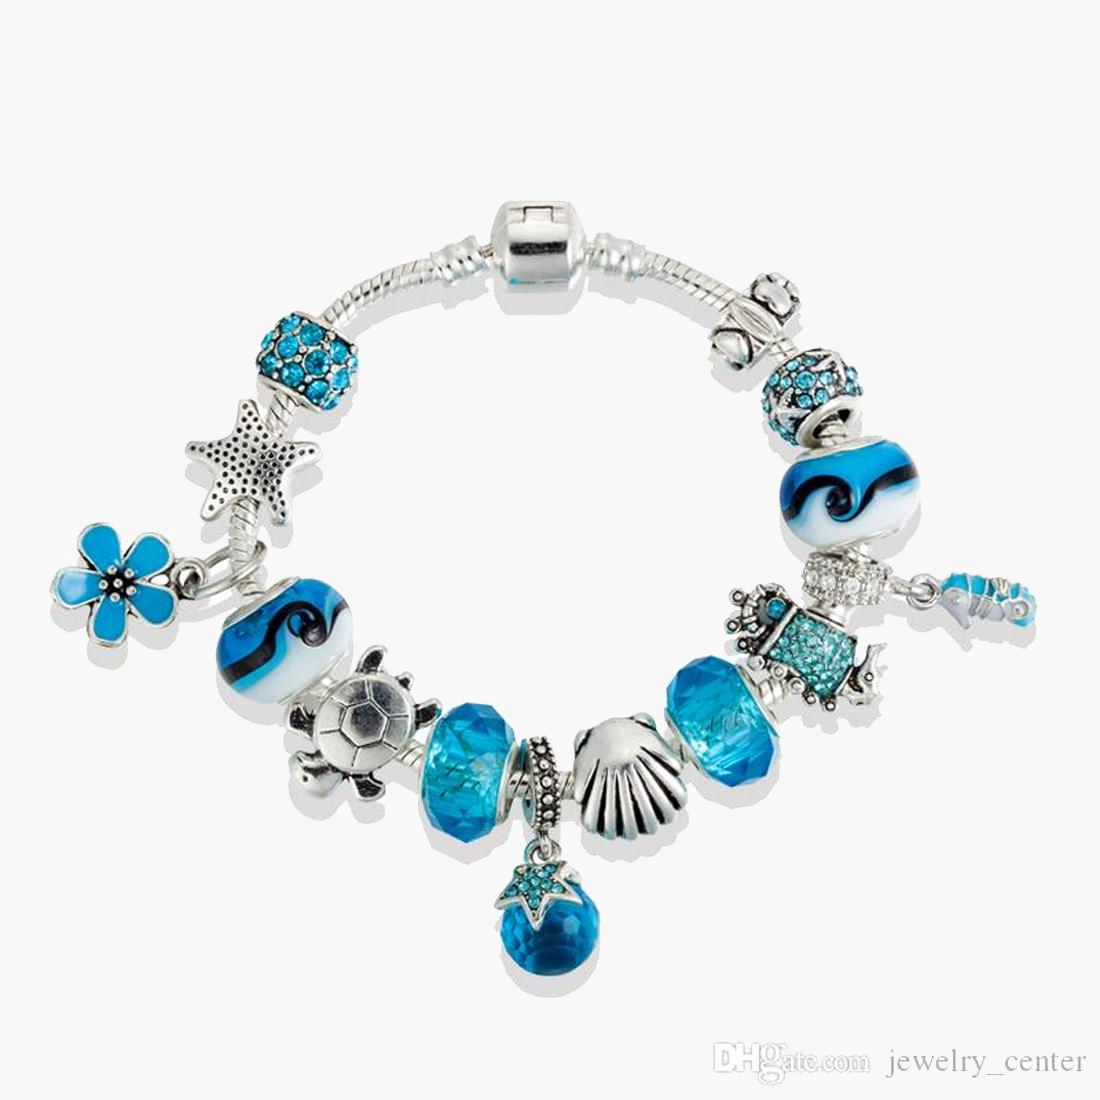 

Fine jewelry Authentic 925 Sterling Silver Bead Fit Pandora Charm Bracelets Star Charms Bracelet Blue Murano Glass Safety Chain Pendant DIY beads